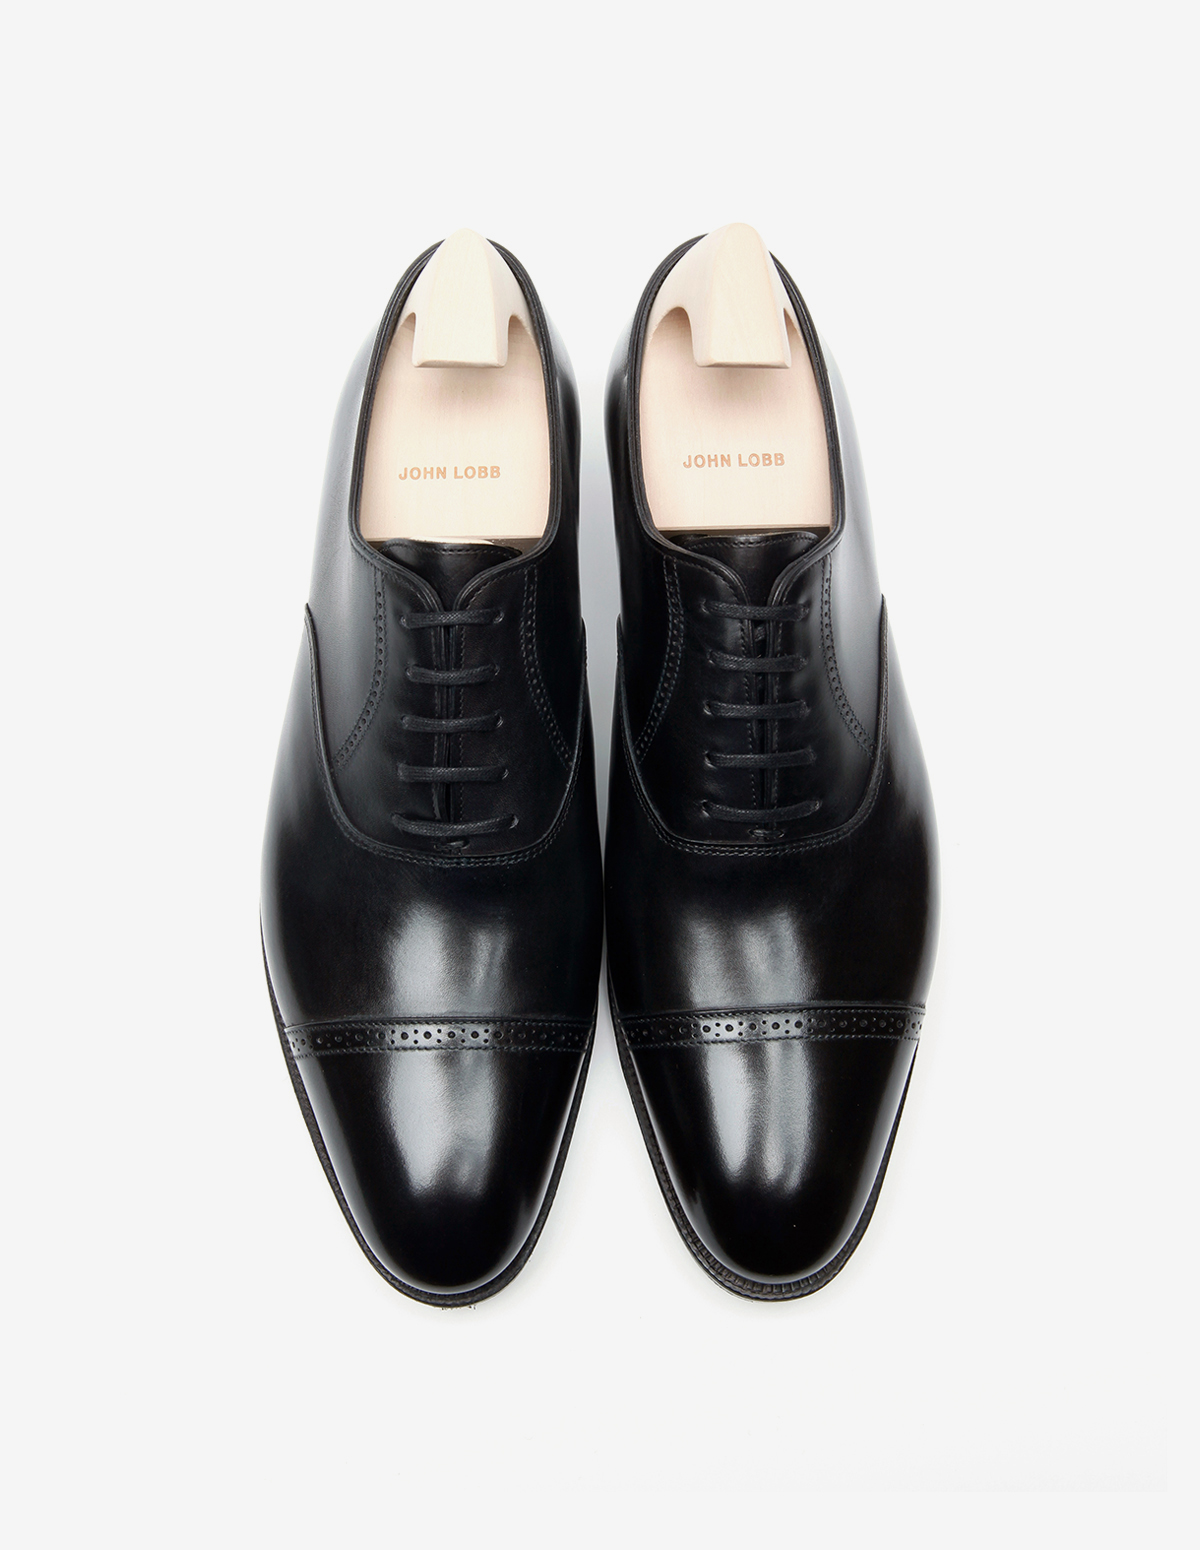 for Men John Lobb Leather Philip Ii Oxford in r Black Save 50% Black Mens Shoes Lace-ups Oxford shoes 